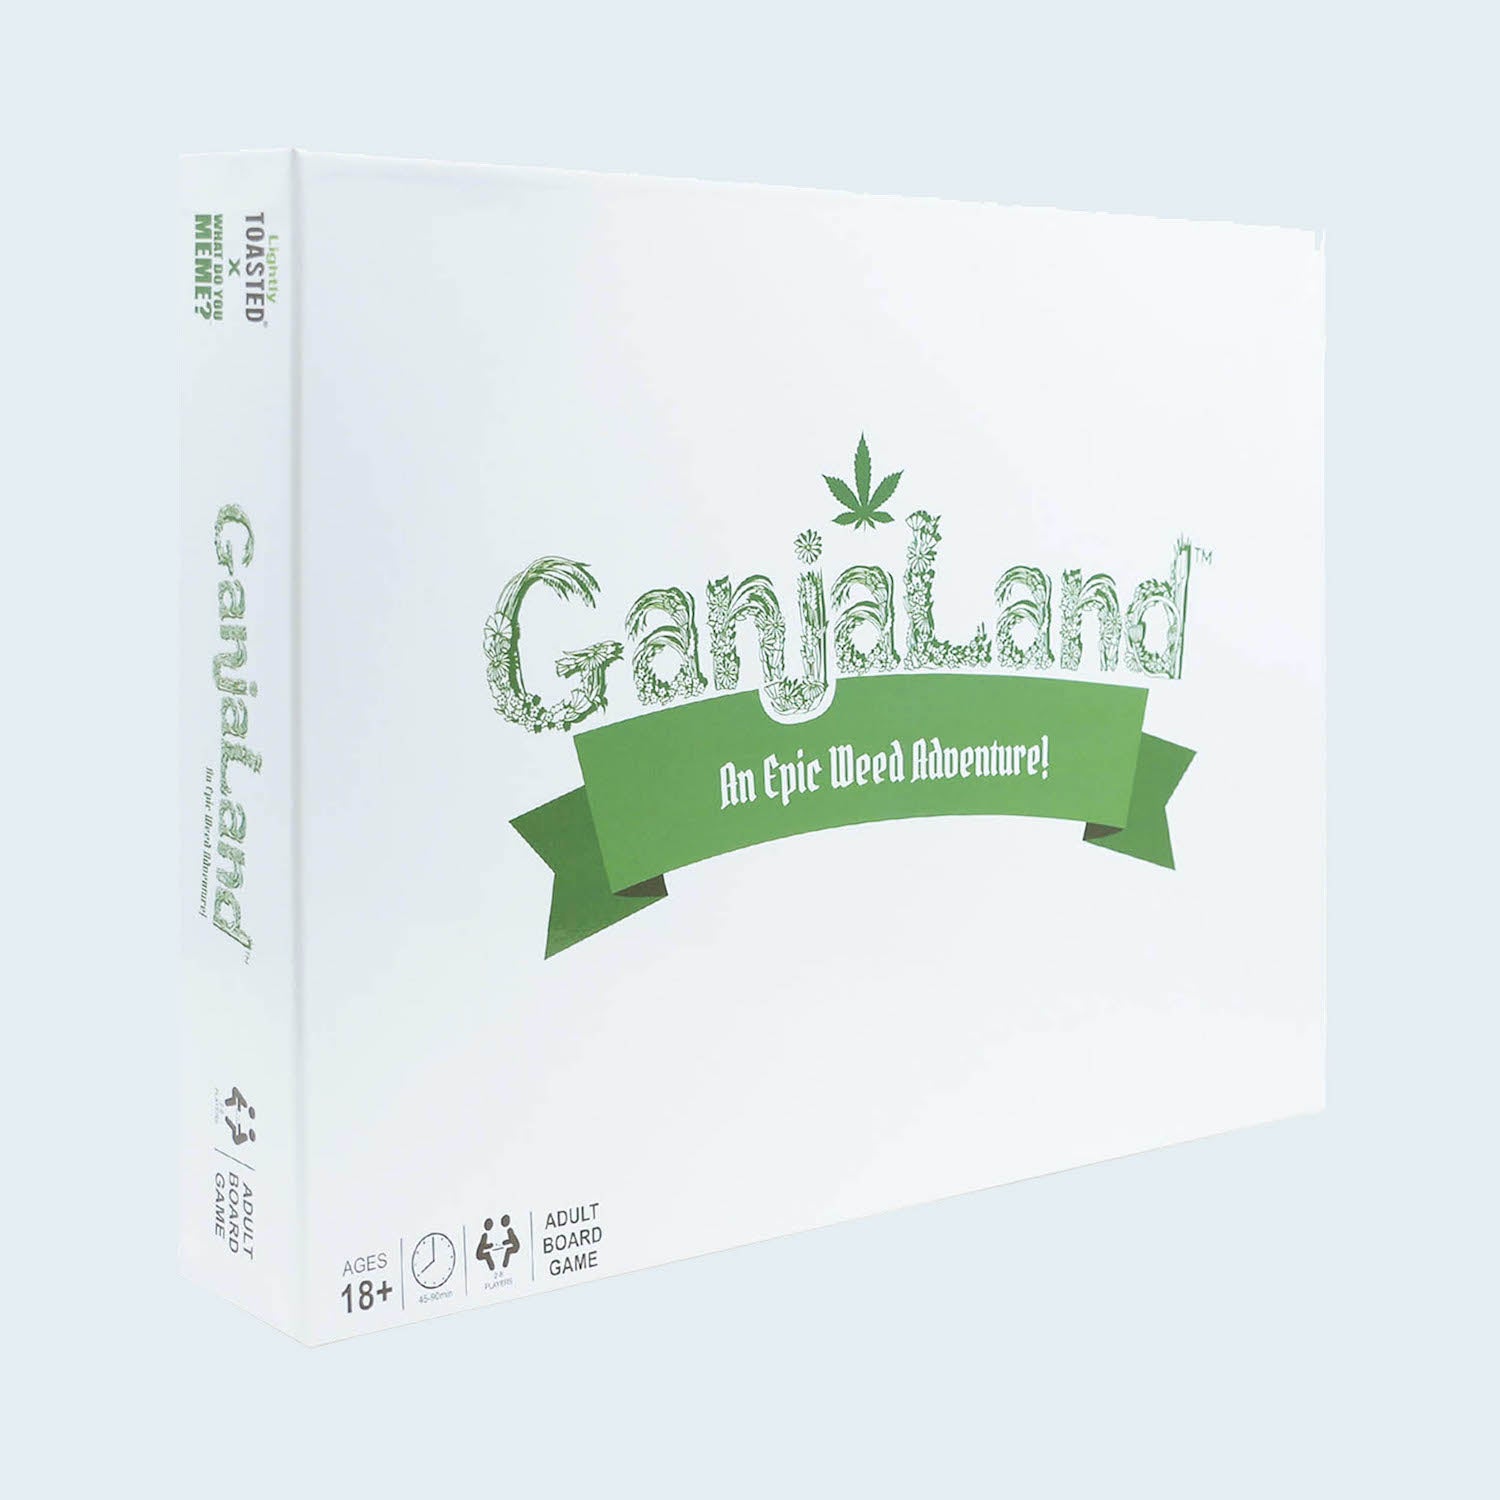 ganjaland-game-box-and-game-play-01-what-do-you-meme-by-relatable